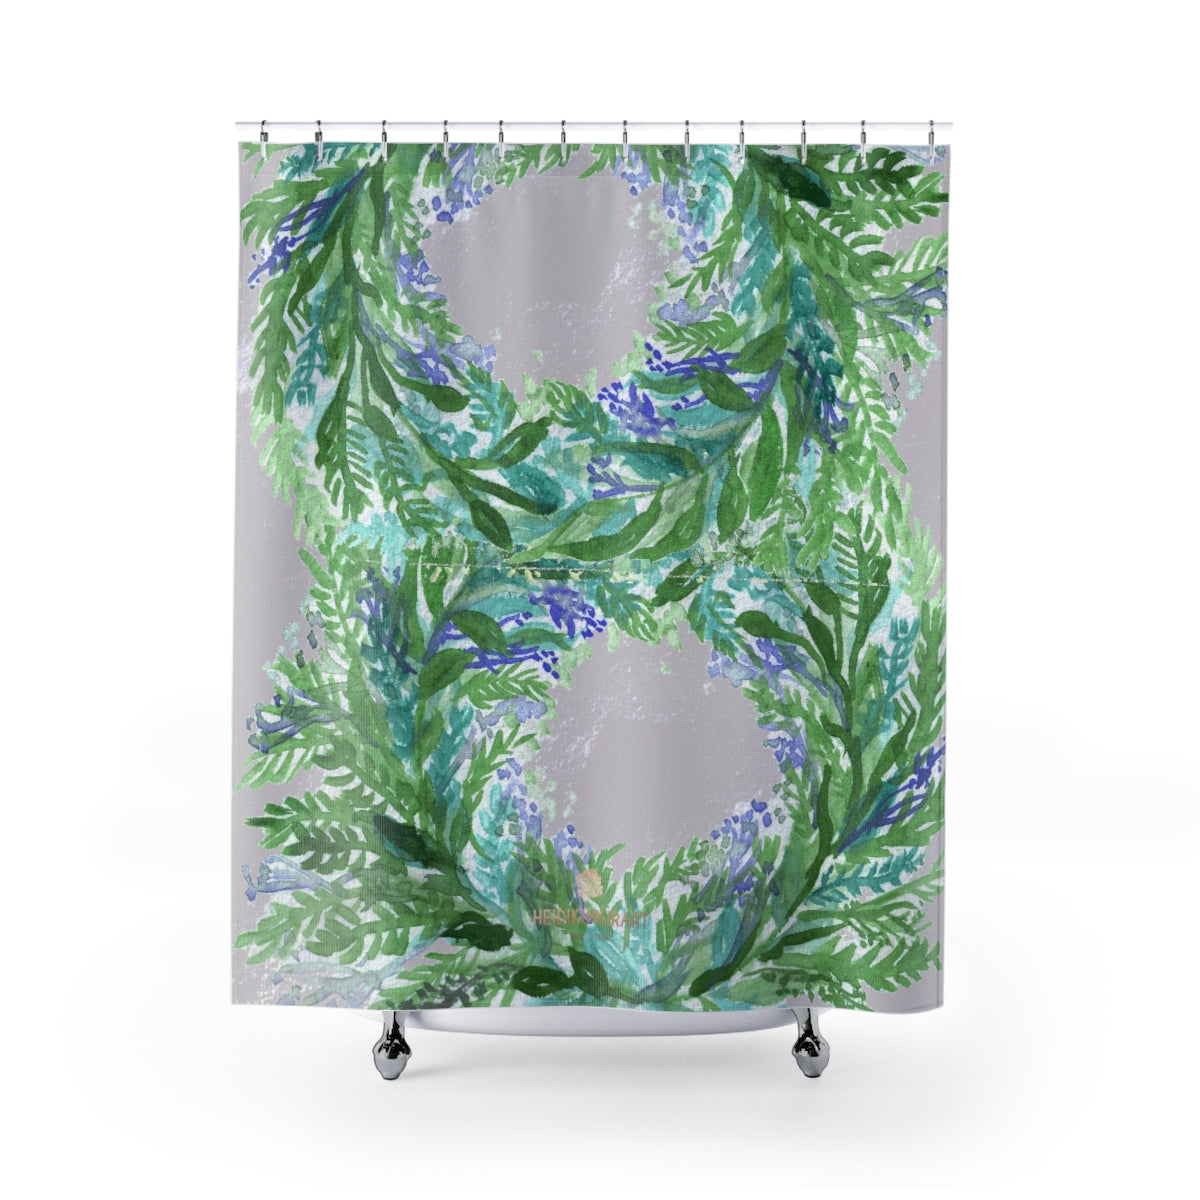 Light Gray French Lavender Floral Print Polyester Shower Curtains- Printed in USA-Shower Curtain-71" x 74"-Heidi Kimura Art LLC Light Gray Lavender Shower Curtains, Light Gray Cute Pastel Purple French Lavender Floral Print - Printed in USA, Large 100% Polyester 71x74 inches Shower Curtains